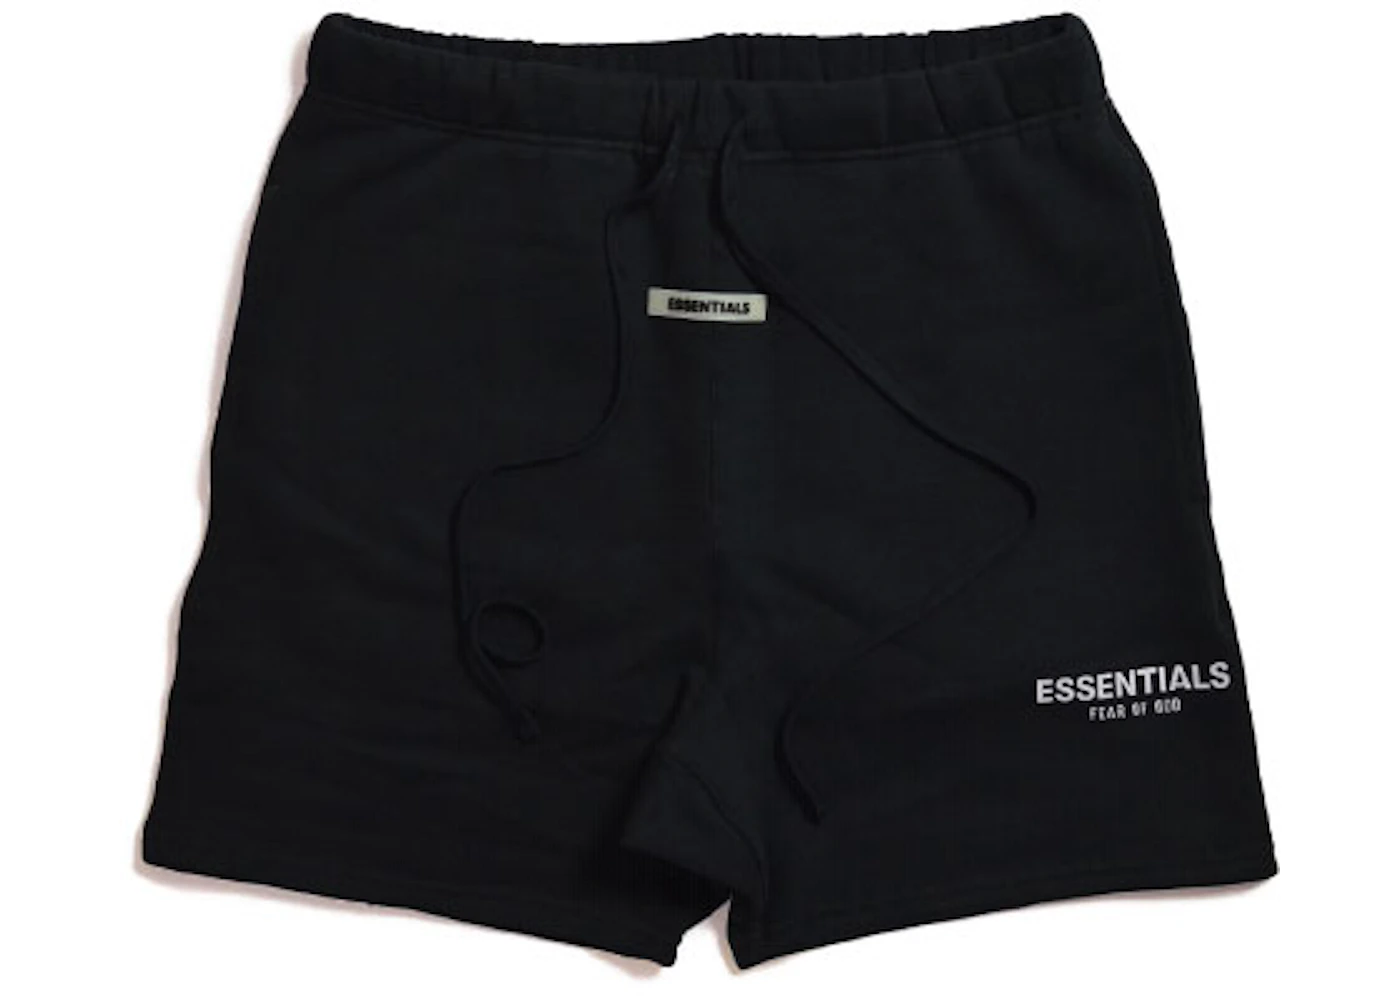 How Essentials Shorts Became a Wardrobe Staple for Modern Fashion